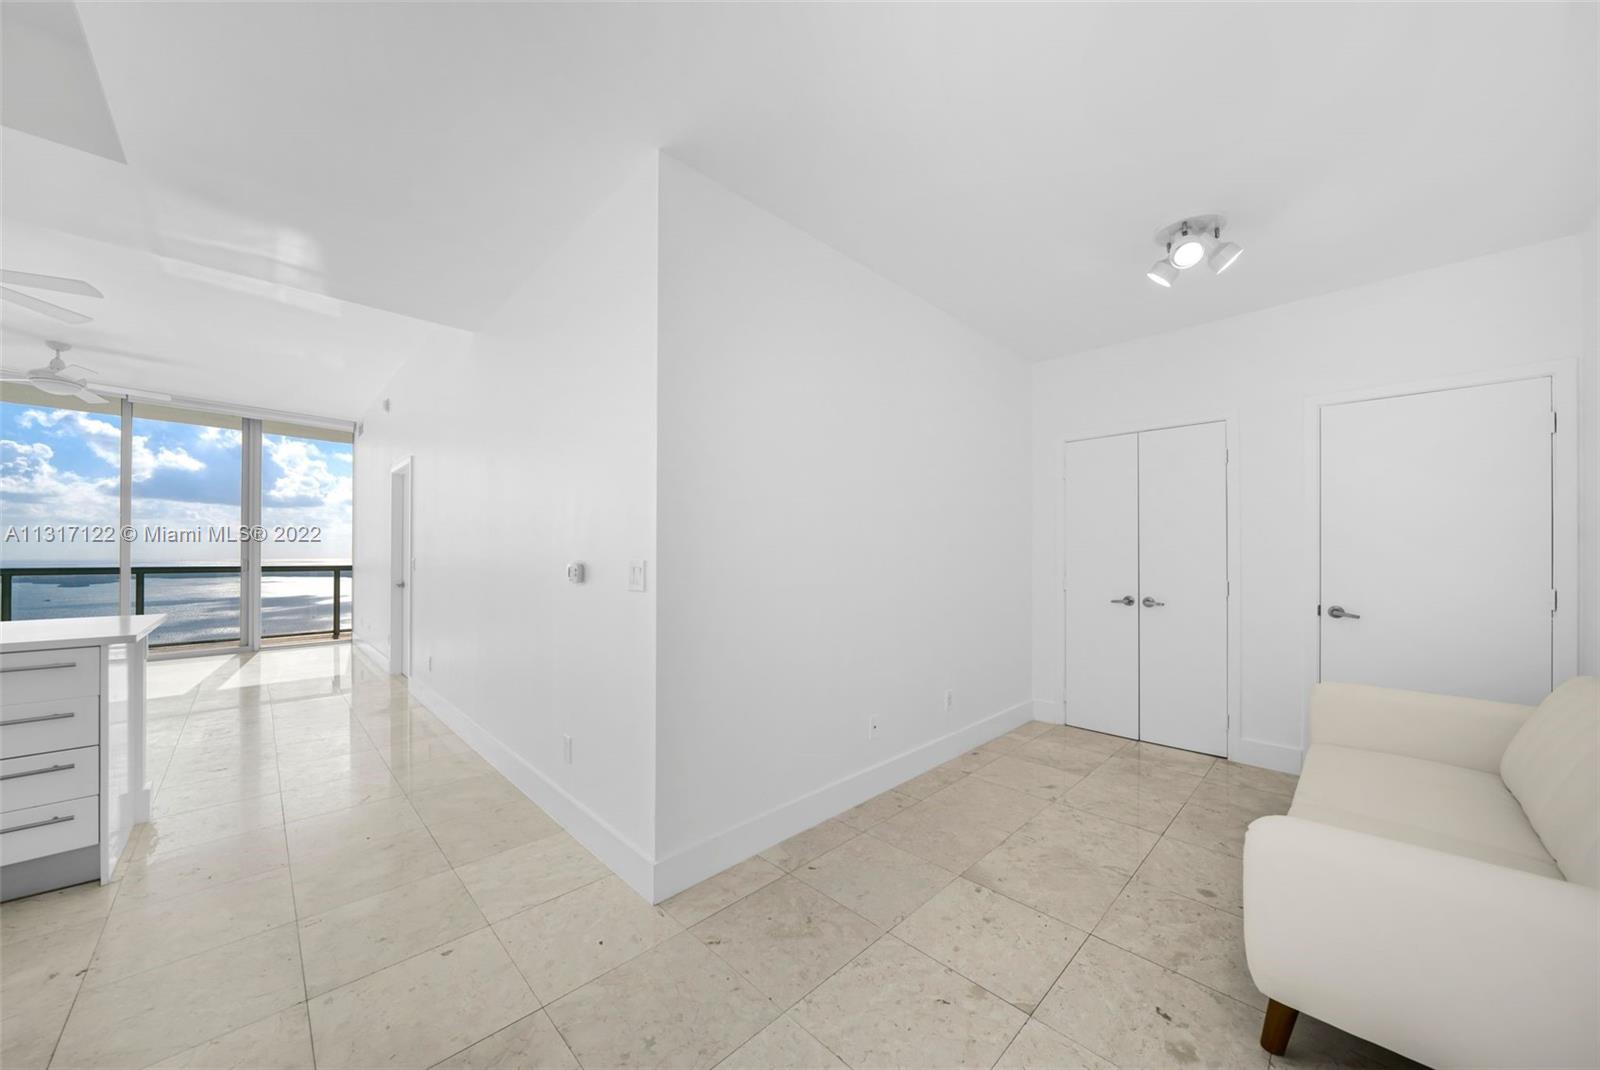 Large & spacious 1-bedroom + Den in the middle of downtown Miami. Enjoy picturesque views from every room with endless ocean & bay views, along with city lights that add a dynamic touch in the night. The condo has been partially updated with a new quartz kitchen counter, along with modern light fixtures and fans installed throughout. Situated next to all of the major highways for easy access, with walking distance to a green park, major entertainment centers and new restaurants & shops that are currently being built just right behind the building. This condo also offers 24/7 security, sunrise & sunset pools, fully equipped gym, Jacuzzi & BBQ area, a volleyball court and more.